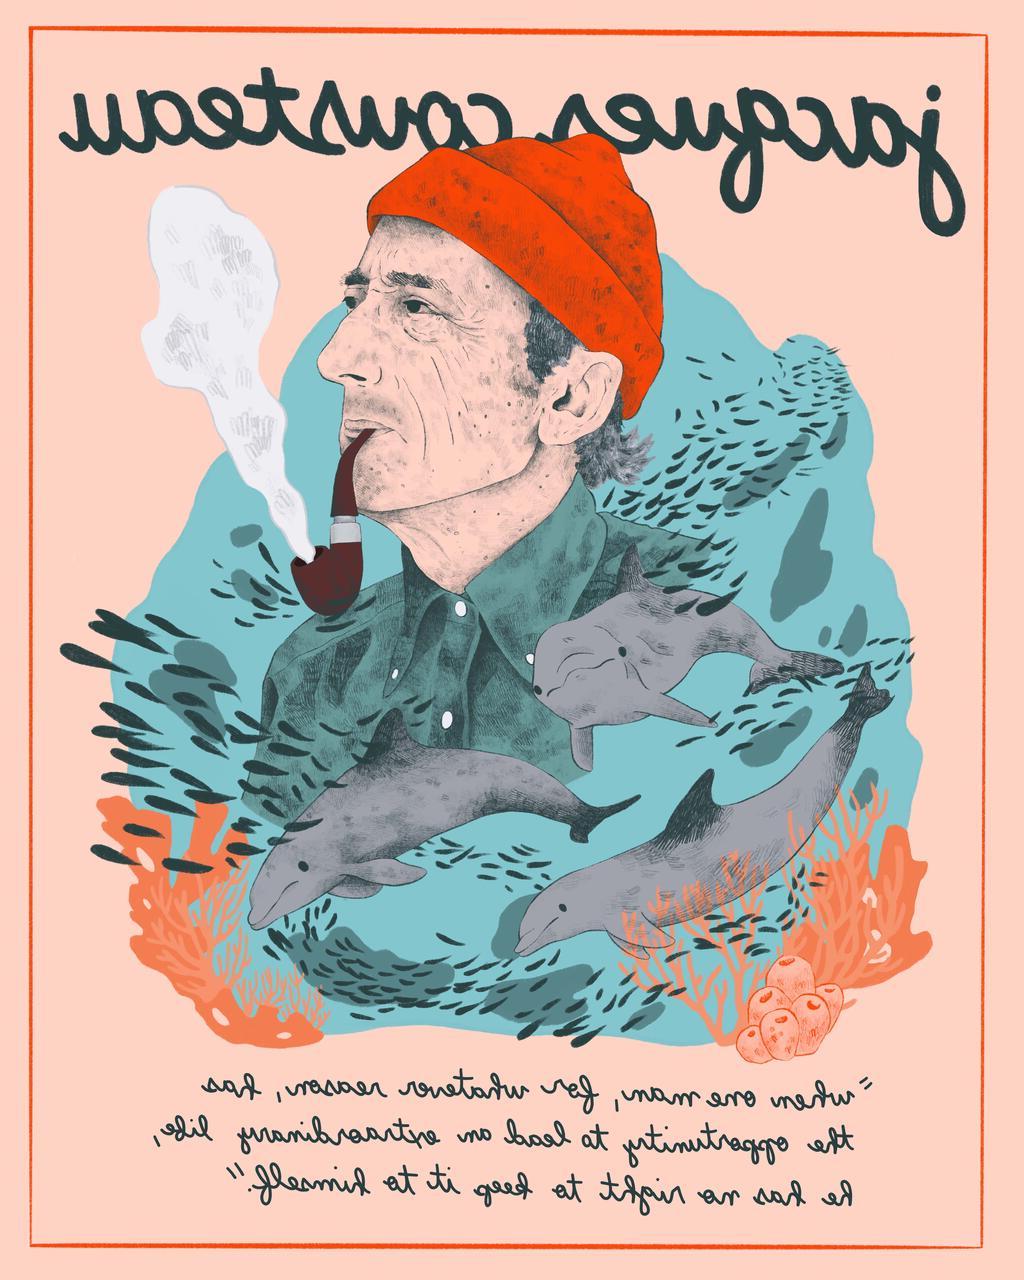 Jacques Cousteau illustrated poster by 锦凯伦